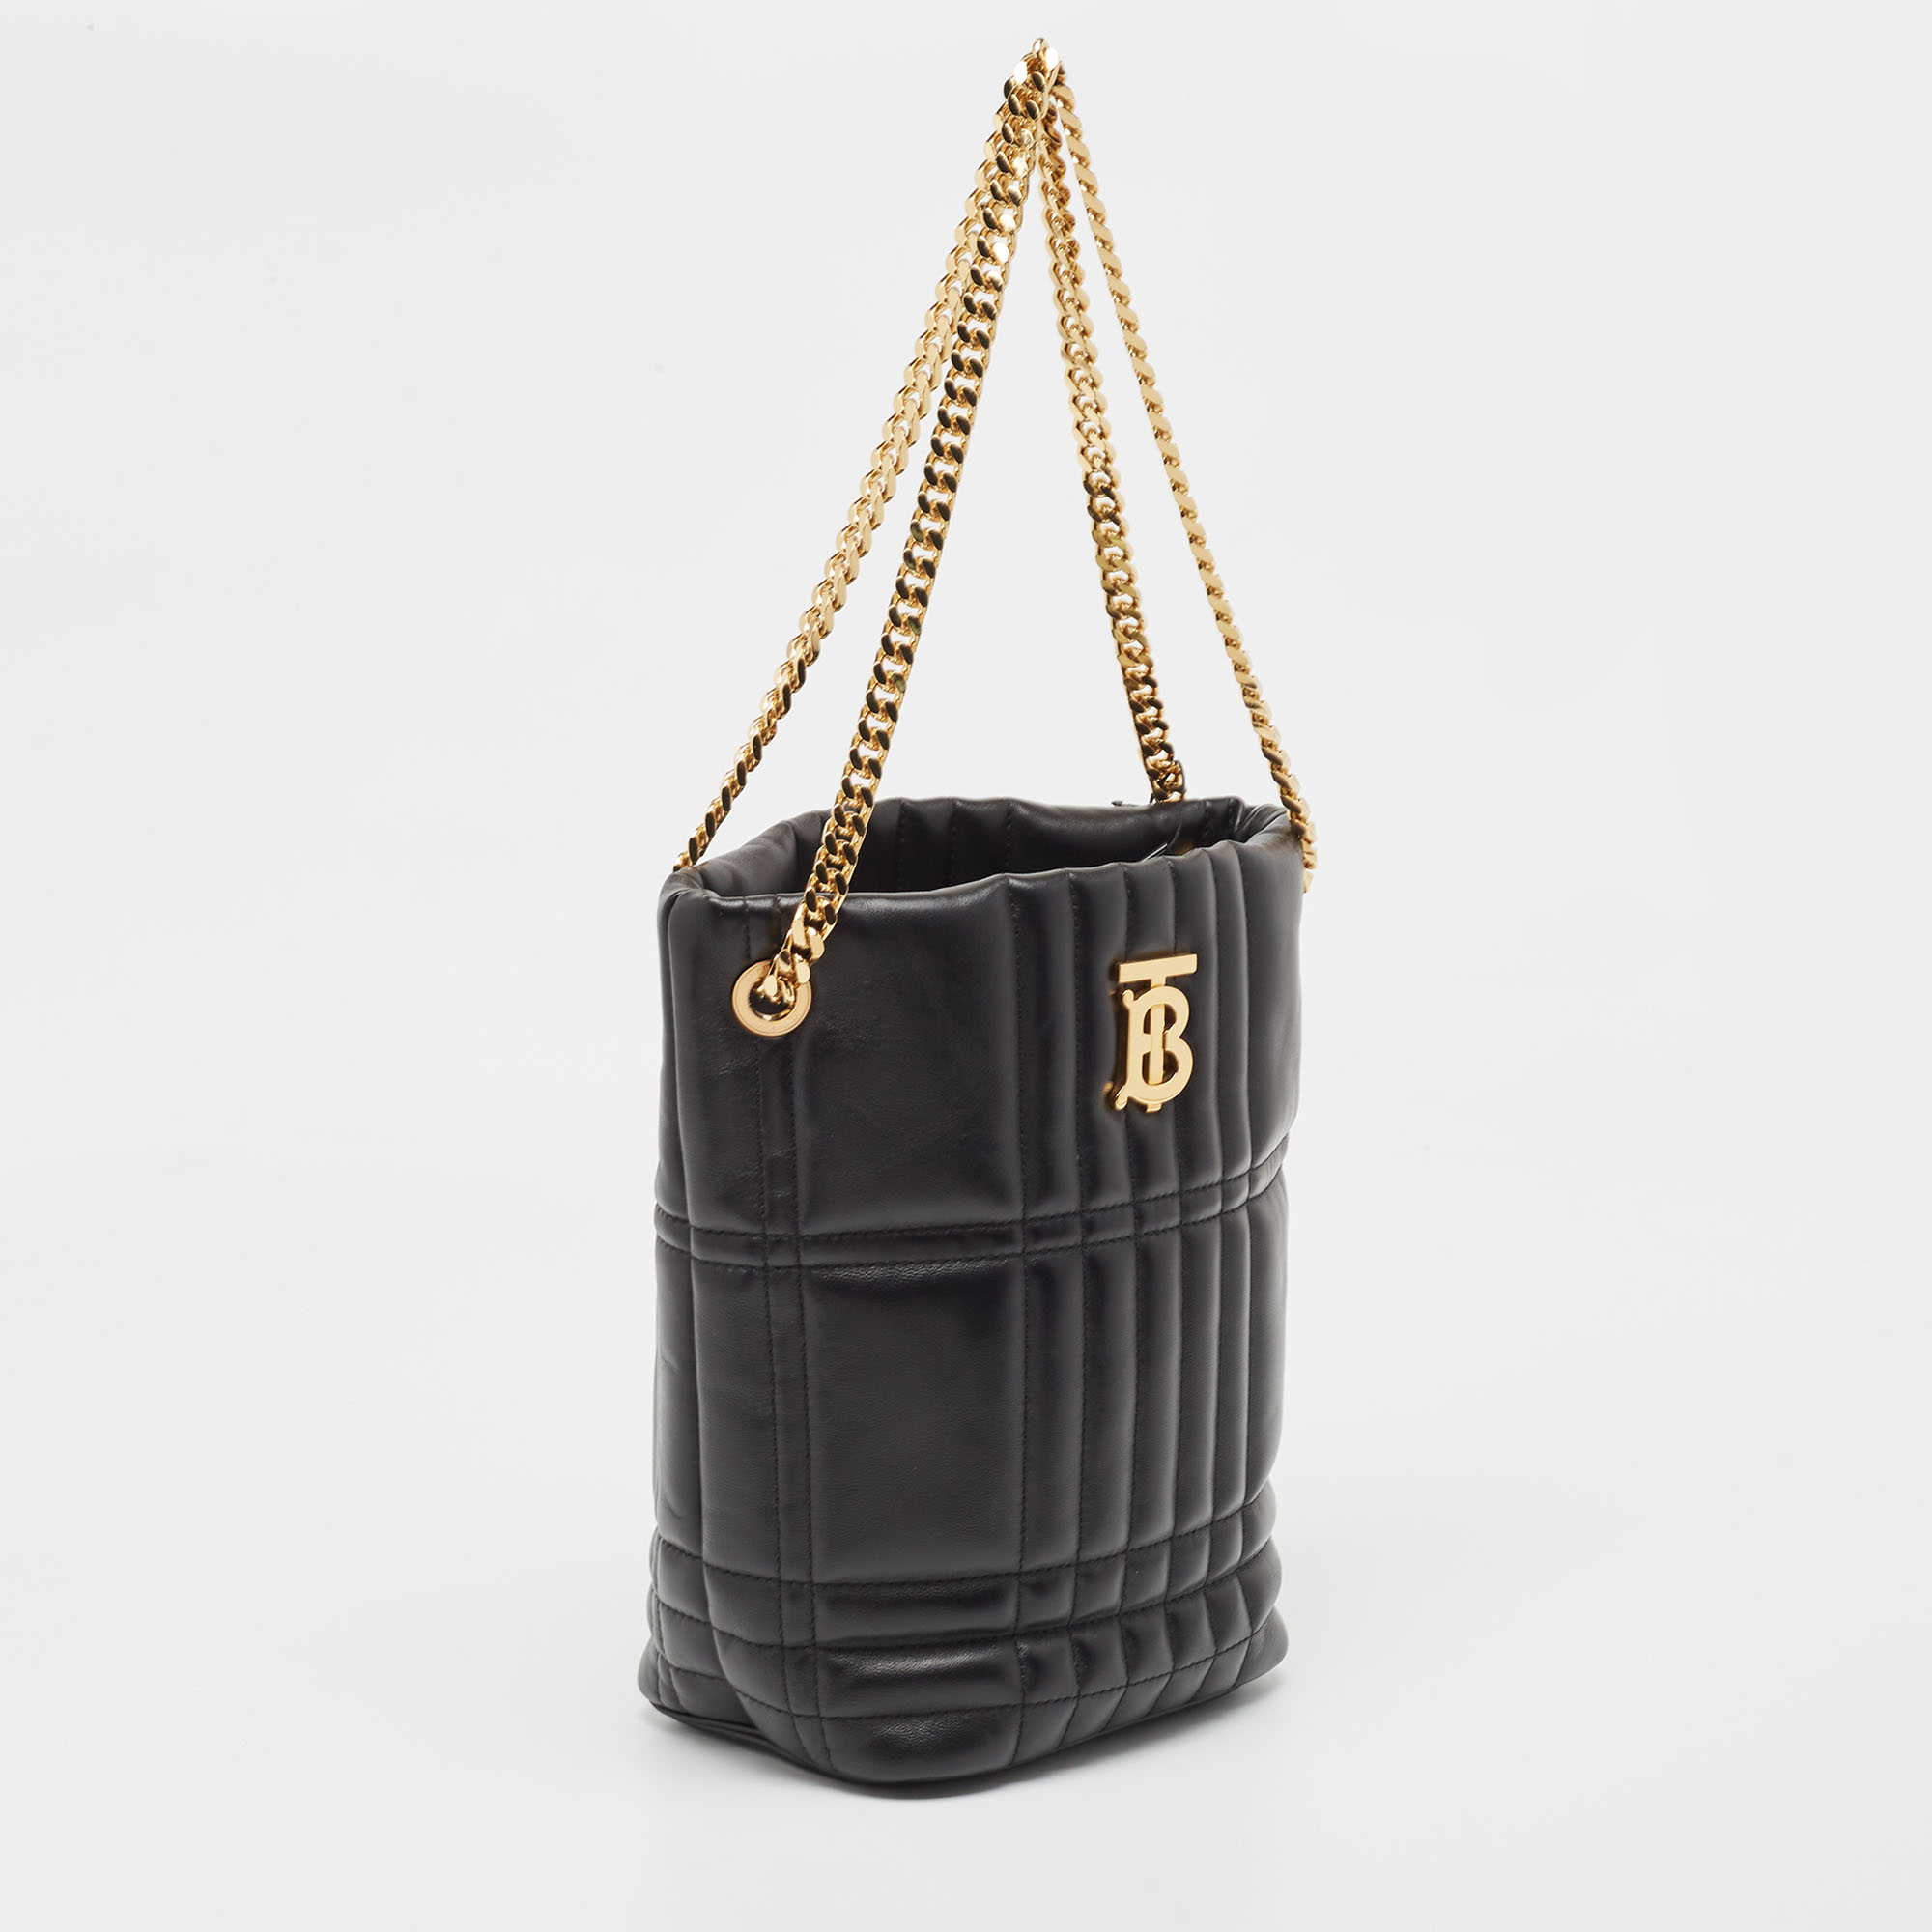 Burberry Black Embossed Quilt Leather Small Lola Bucket Bag